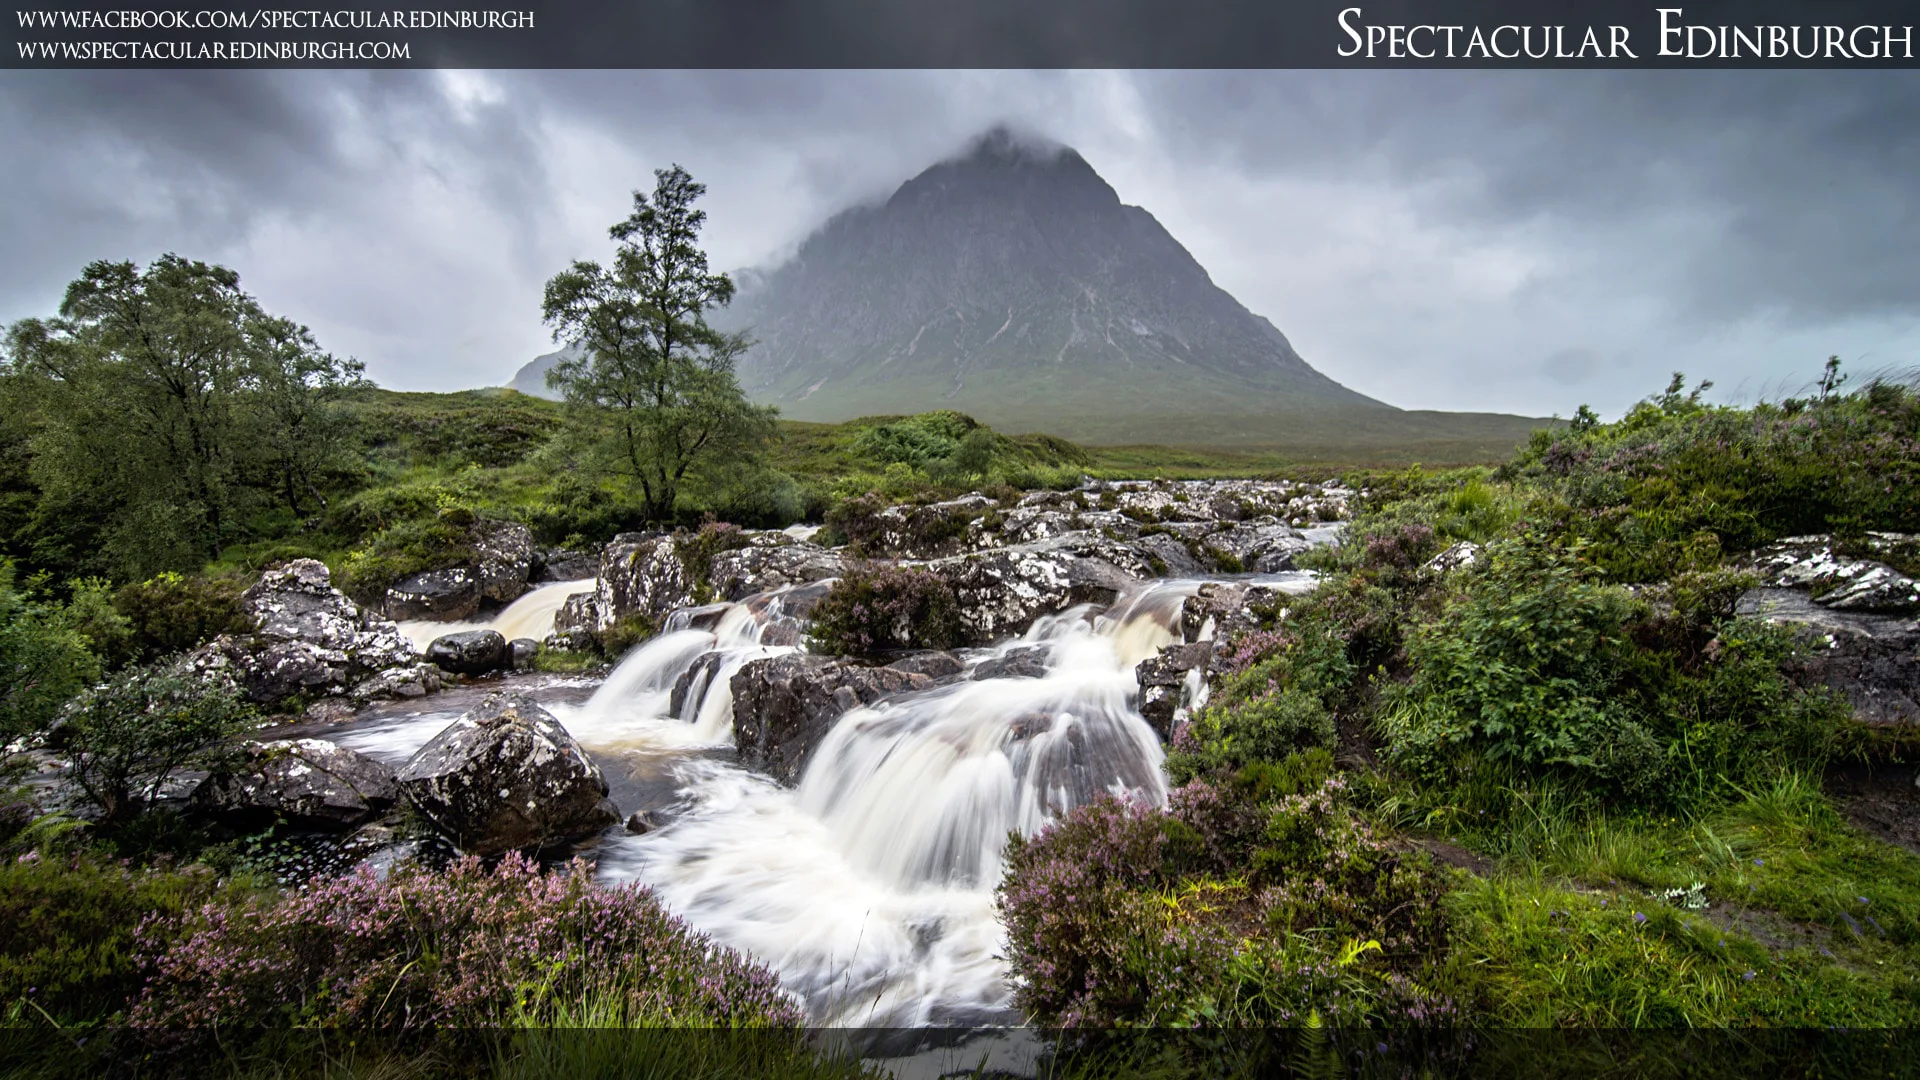 Wallpaper 11 - Buachaille Etive Mor from the River Coupall - Spectacular Edinburgh Photography